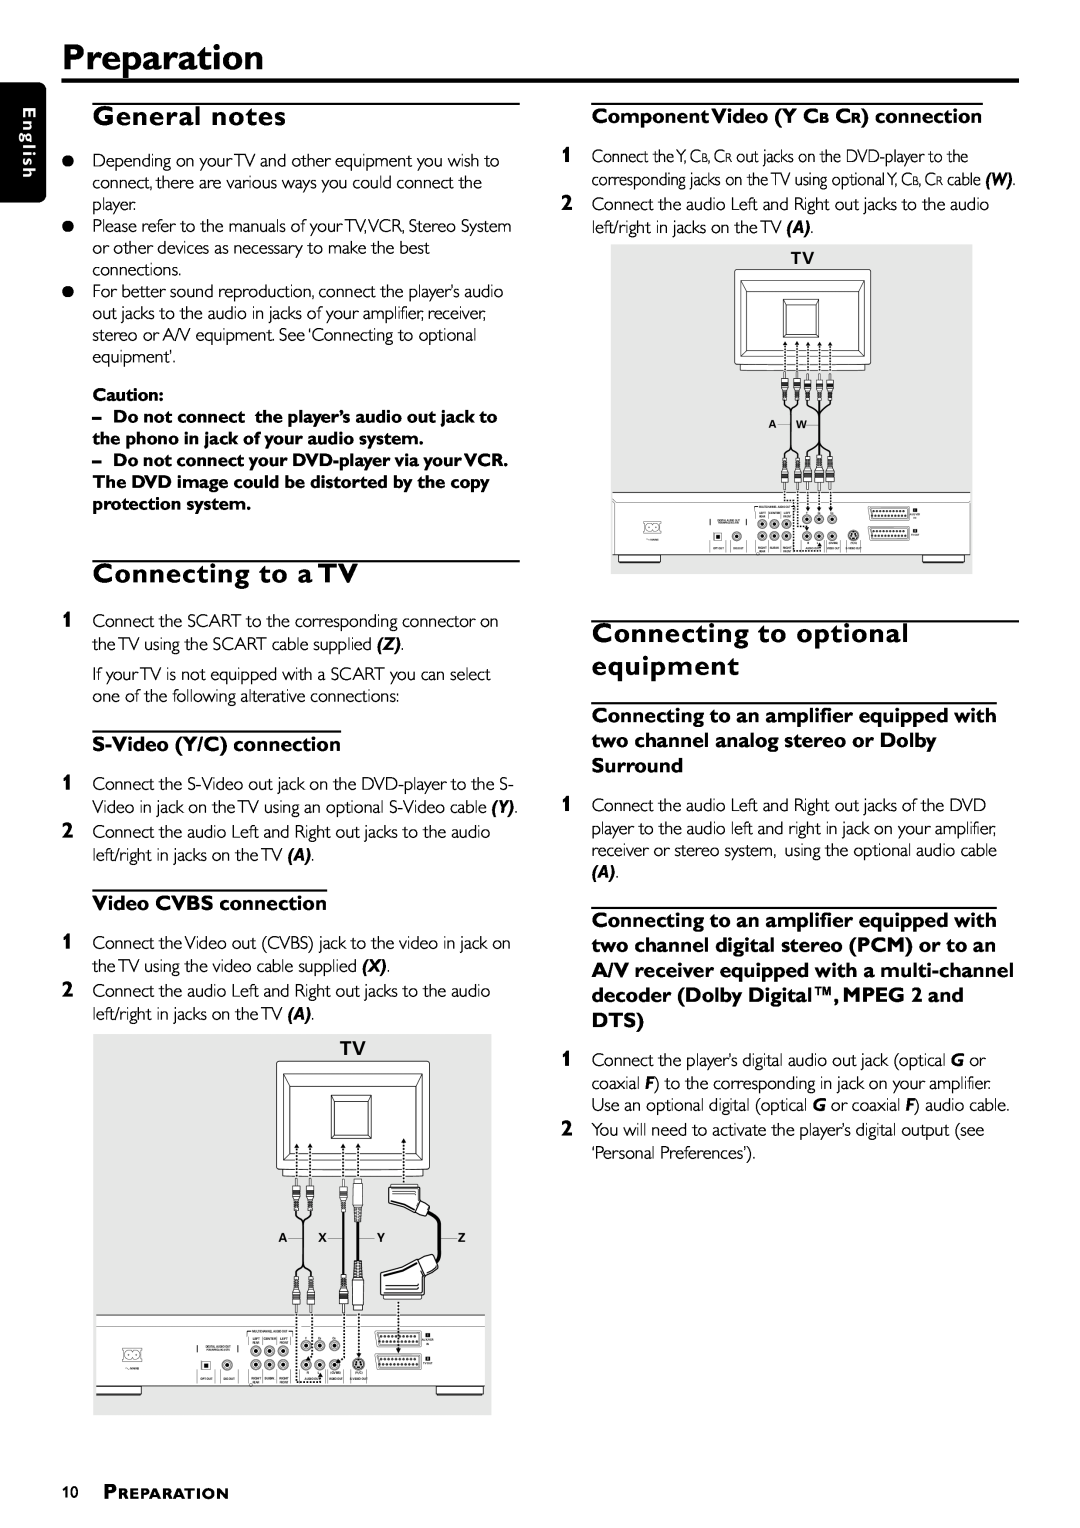 Philips DVD957/G55 Preparation, General notes, Connecting to a TV, Connecting to optional equipment, Video CVBS connection 